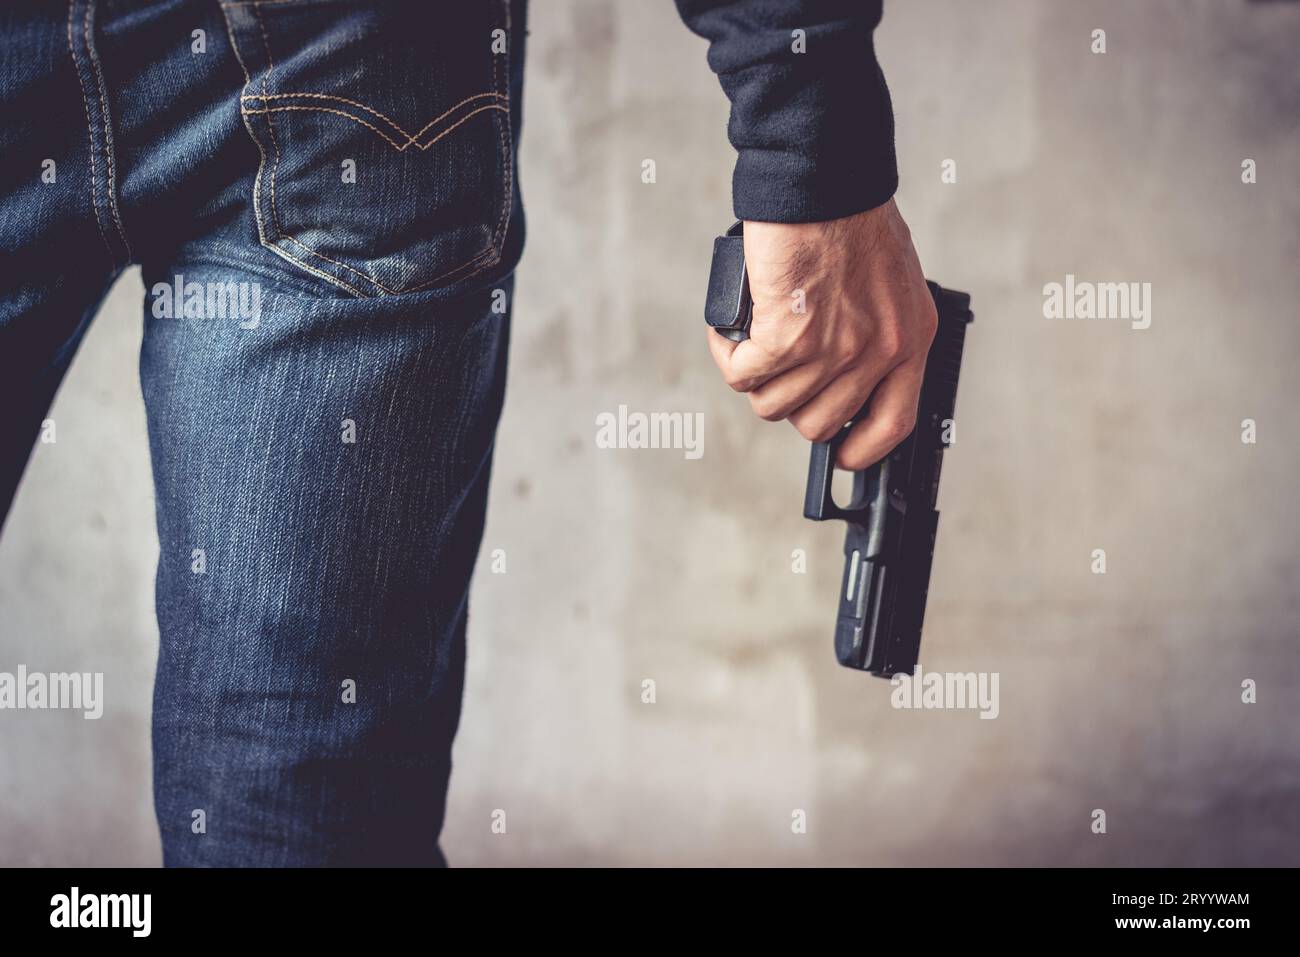 Close up of man holding hand gun. Man wearing blue jeans. Terrorist and Robber concept. Police and Soldier concept. Weapon theme Stock Photo